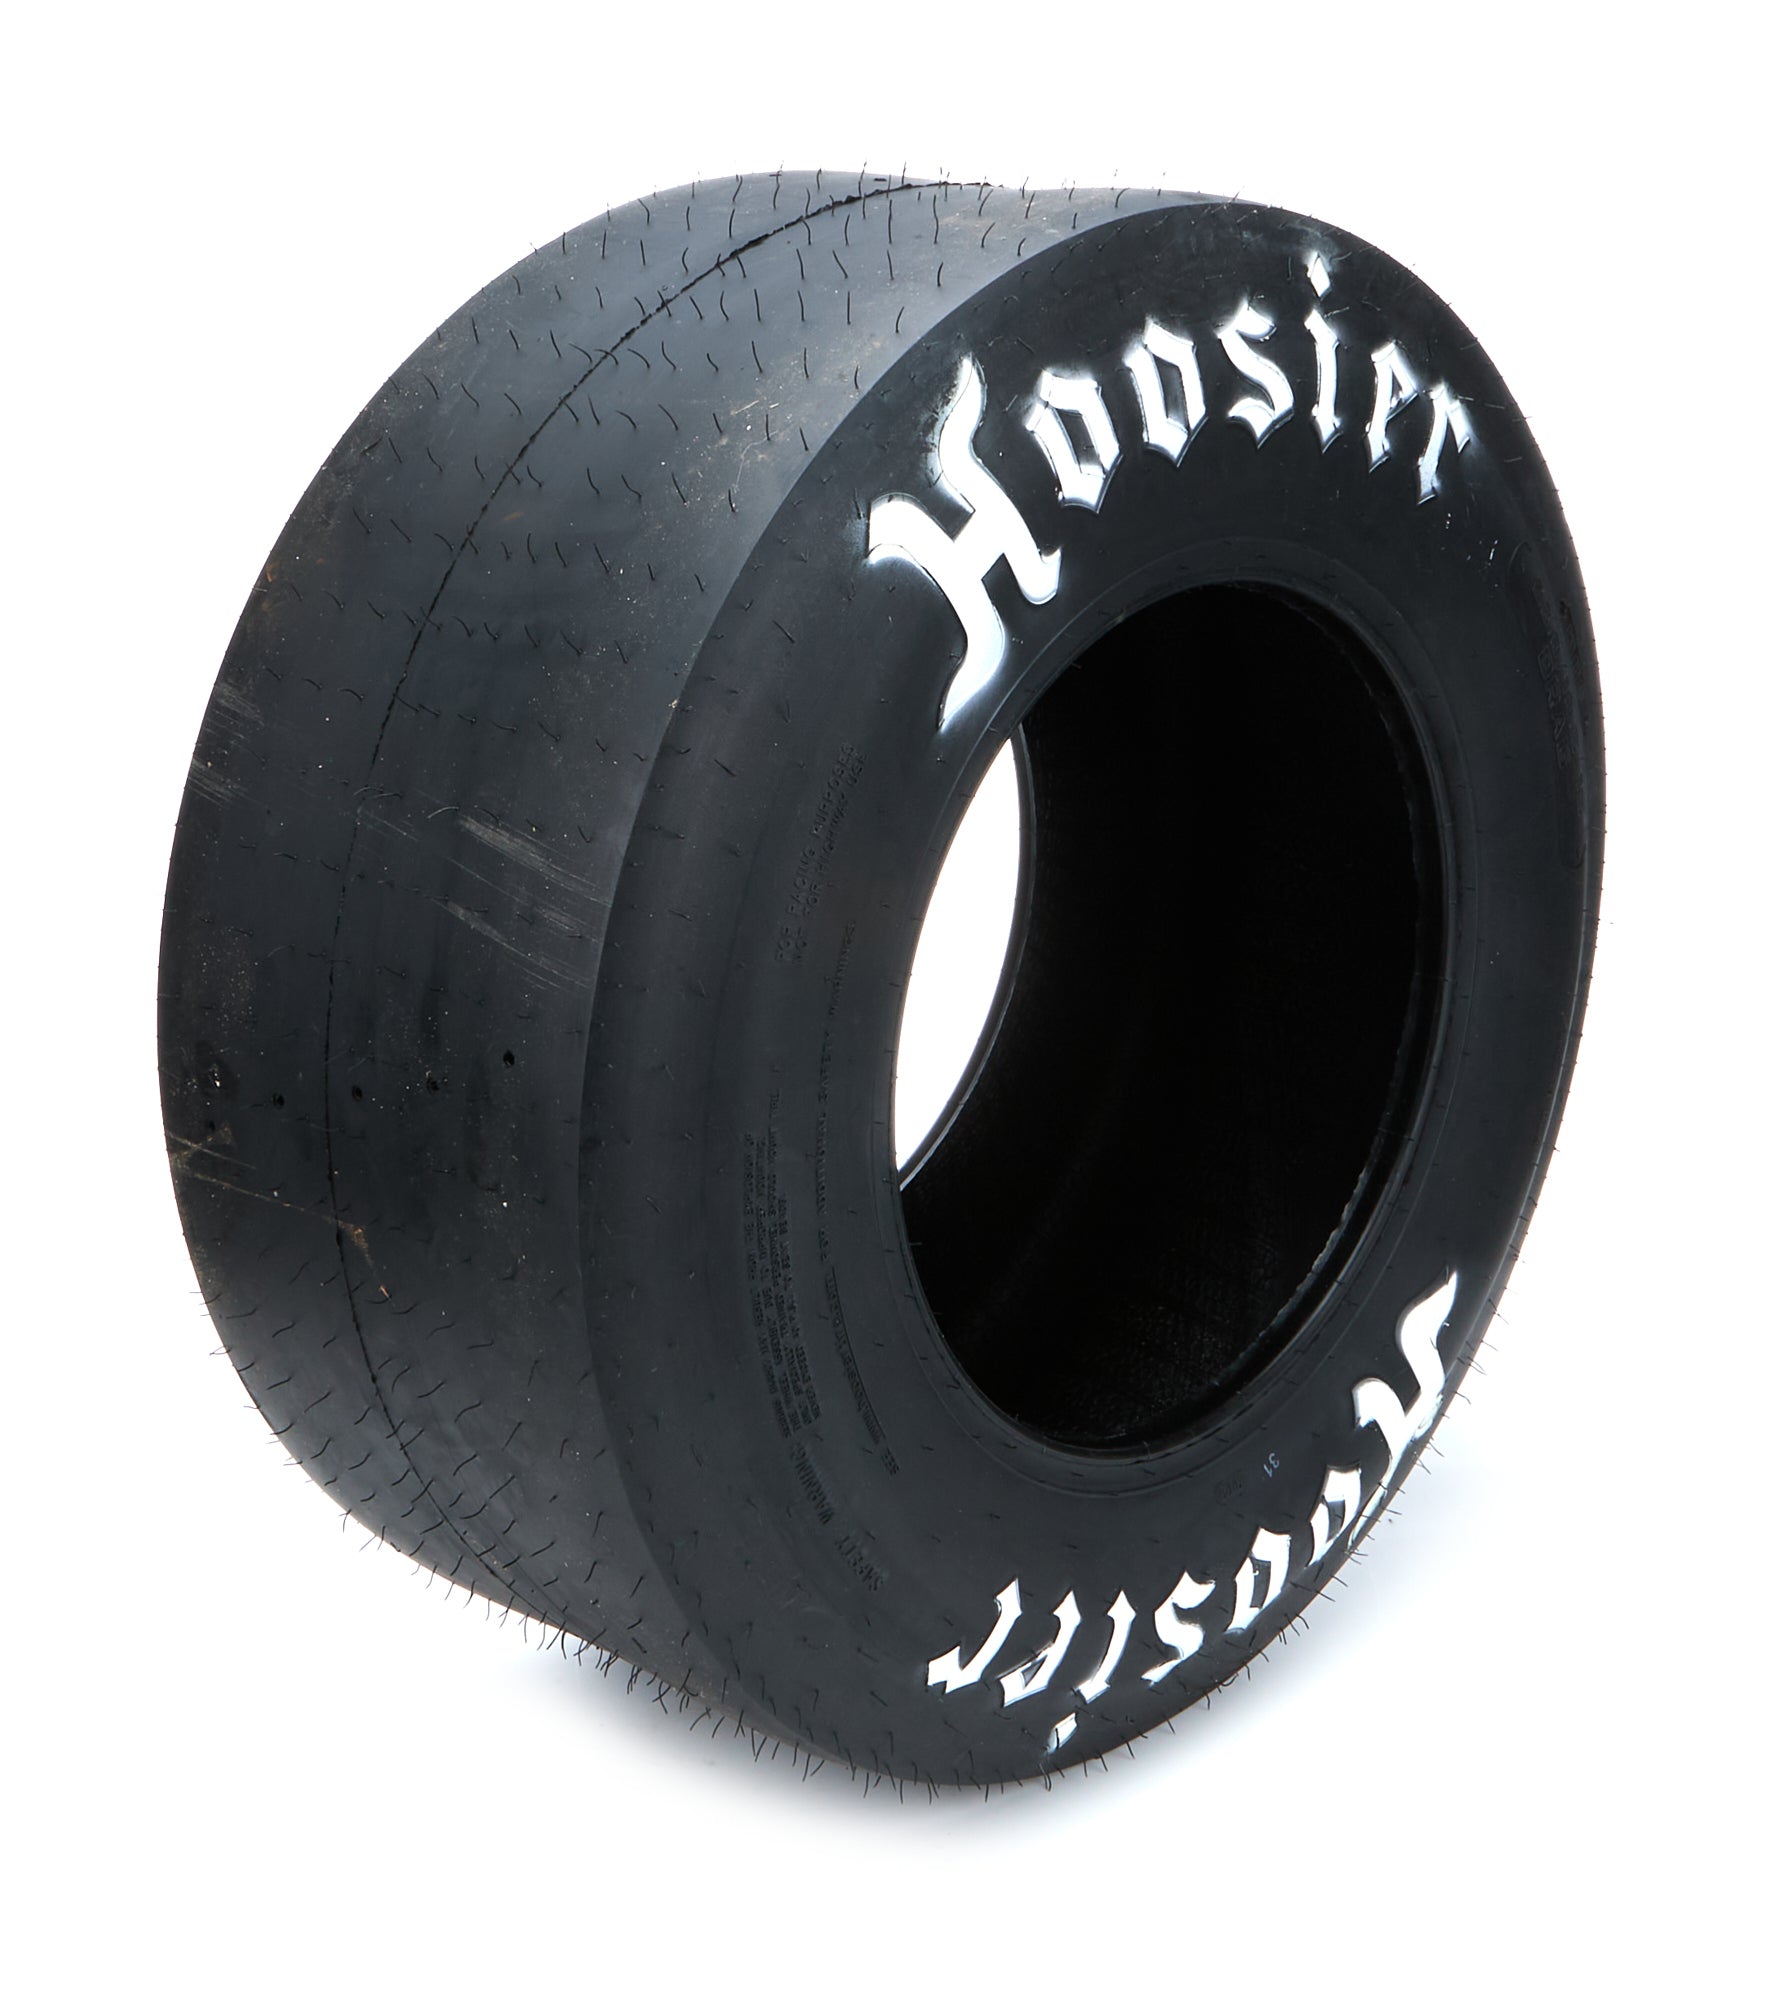 Hoosier 28.0x10.5-15 Drag Tire - Stiff Side Wall Tires and Tubes Tires main image